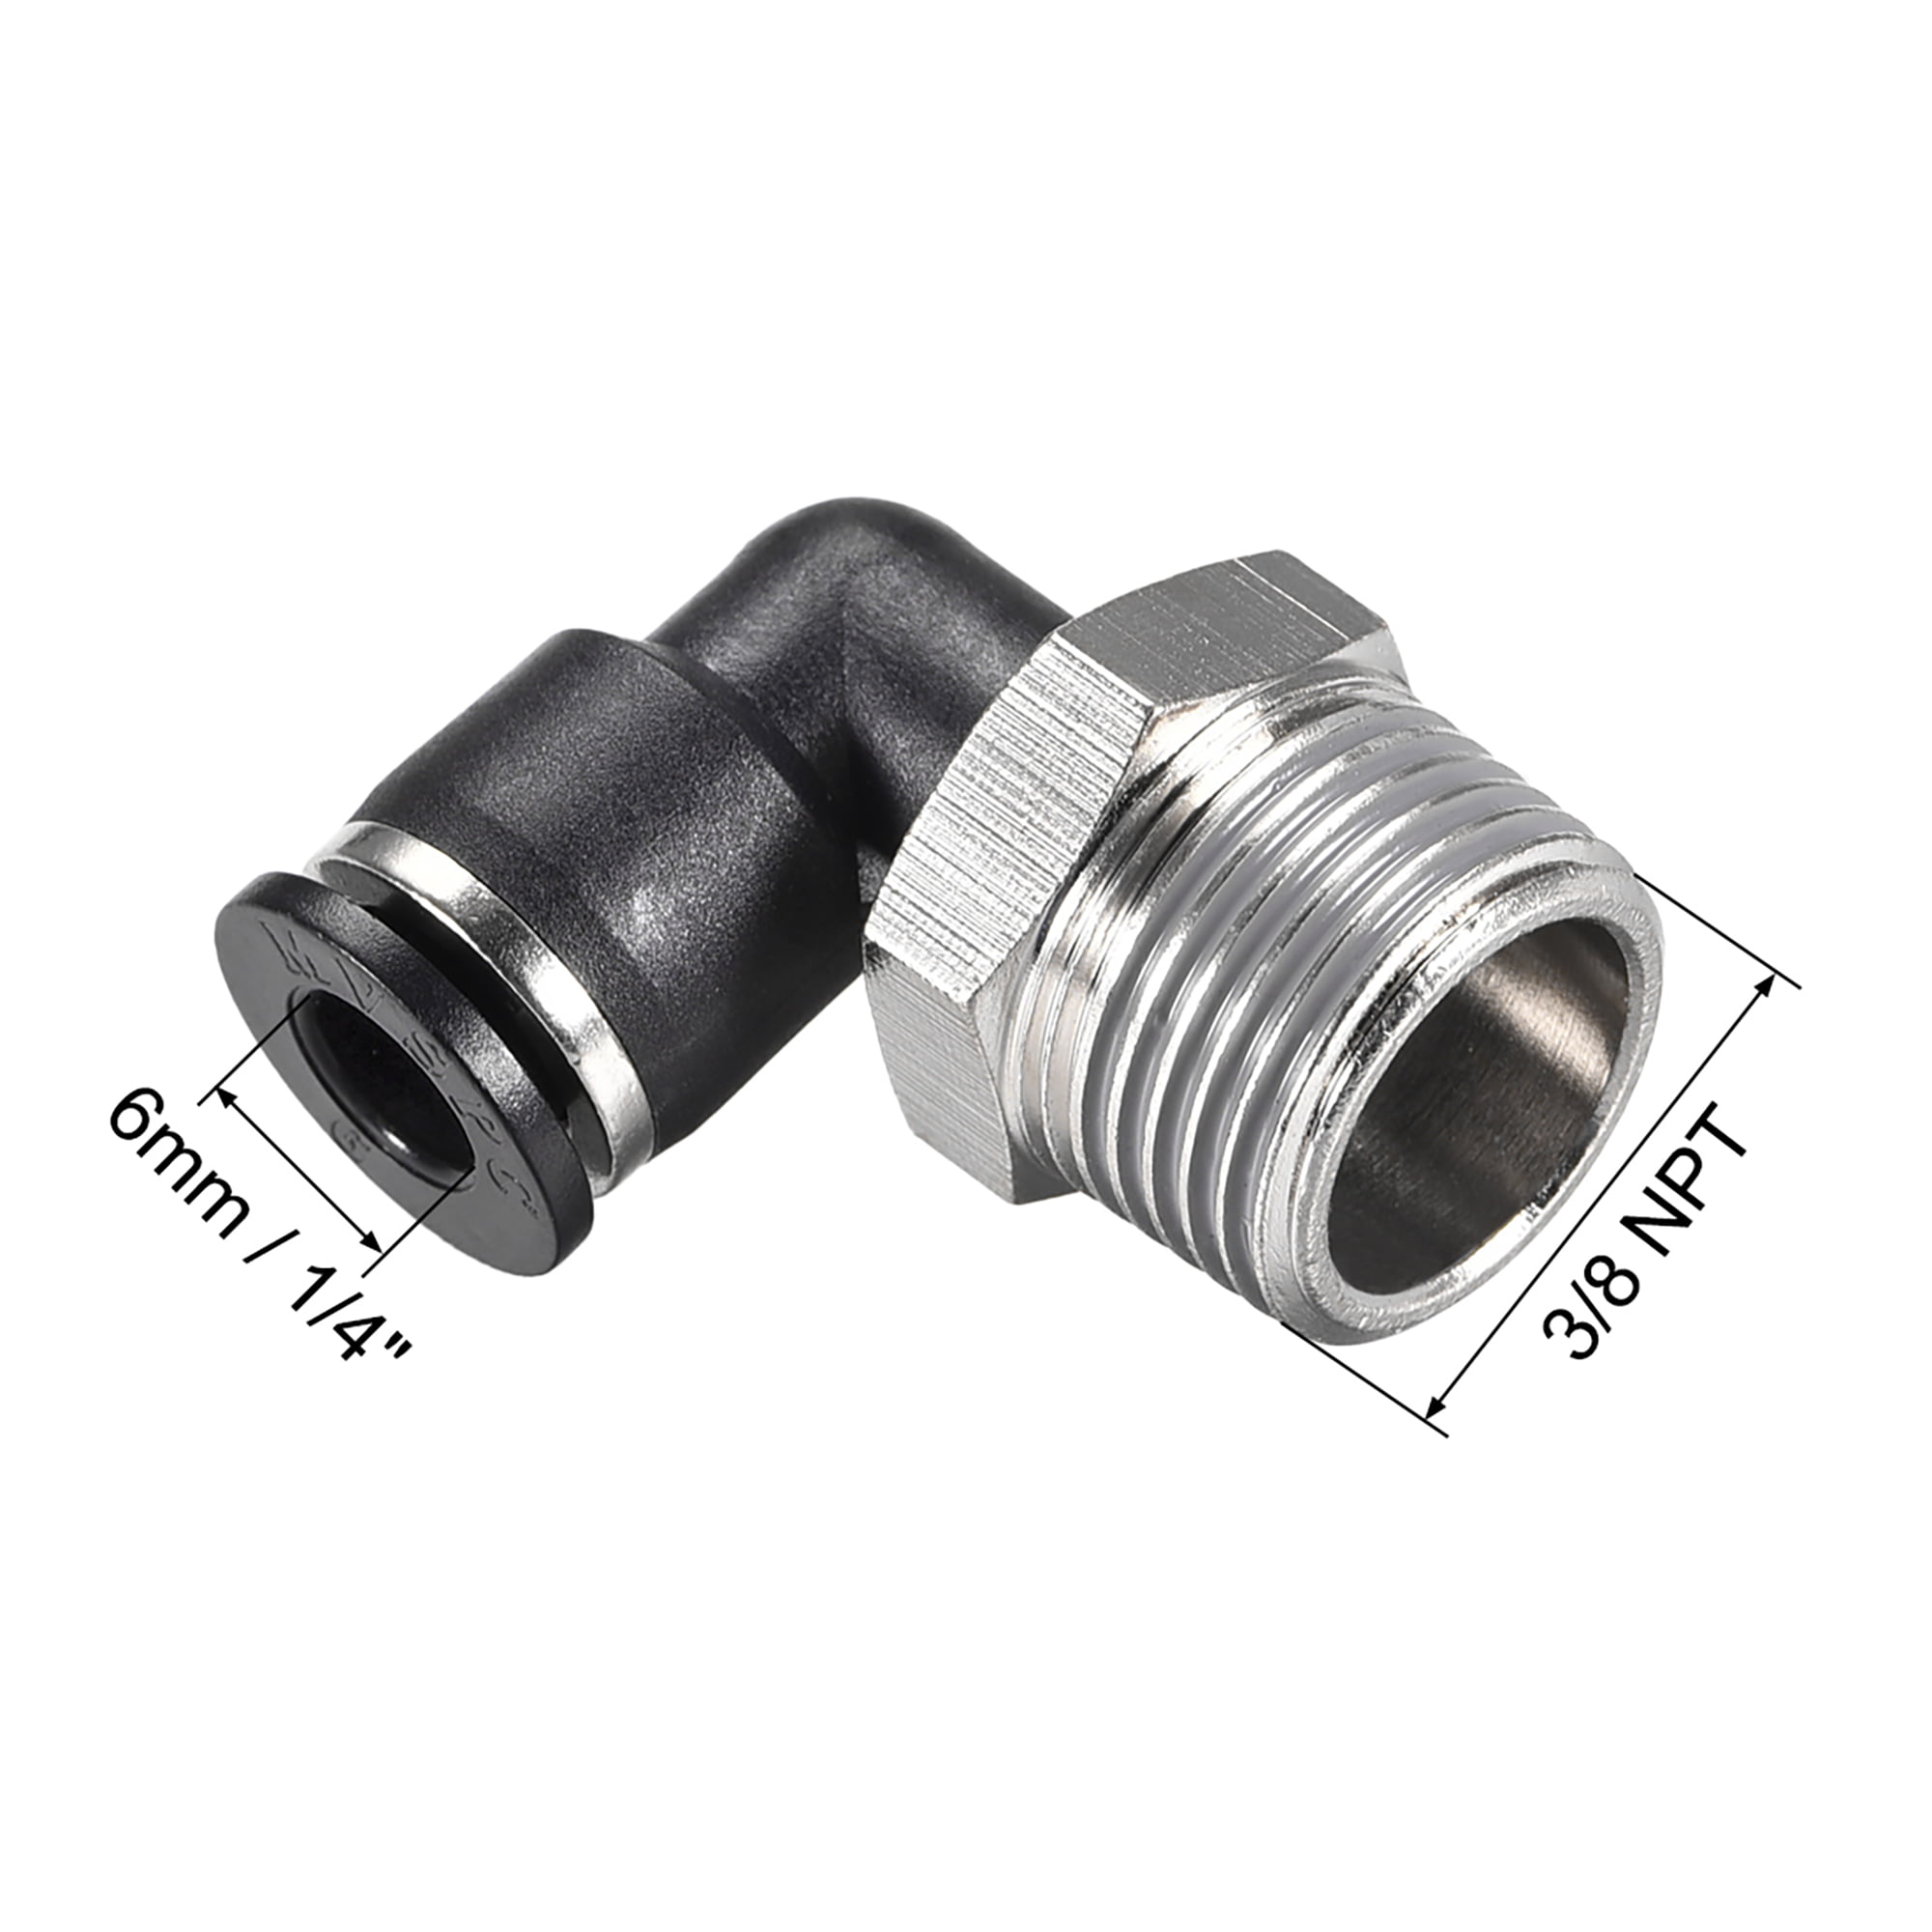 ELBOW Adapter for 1/2" Tube OD x 3/8 NPT Male Push-to-Connect Tube Fitting 